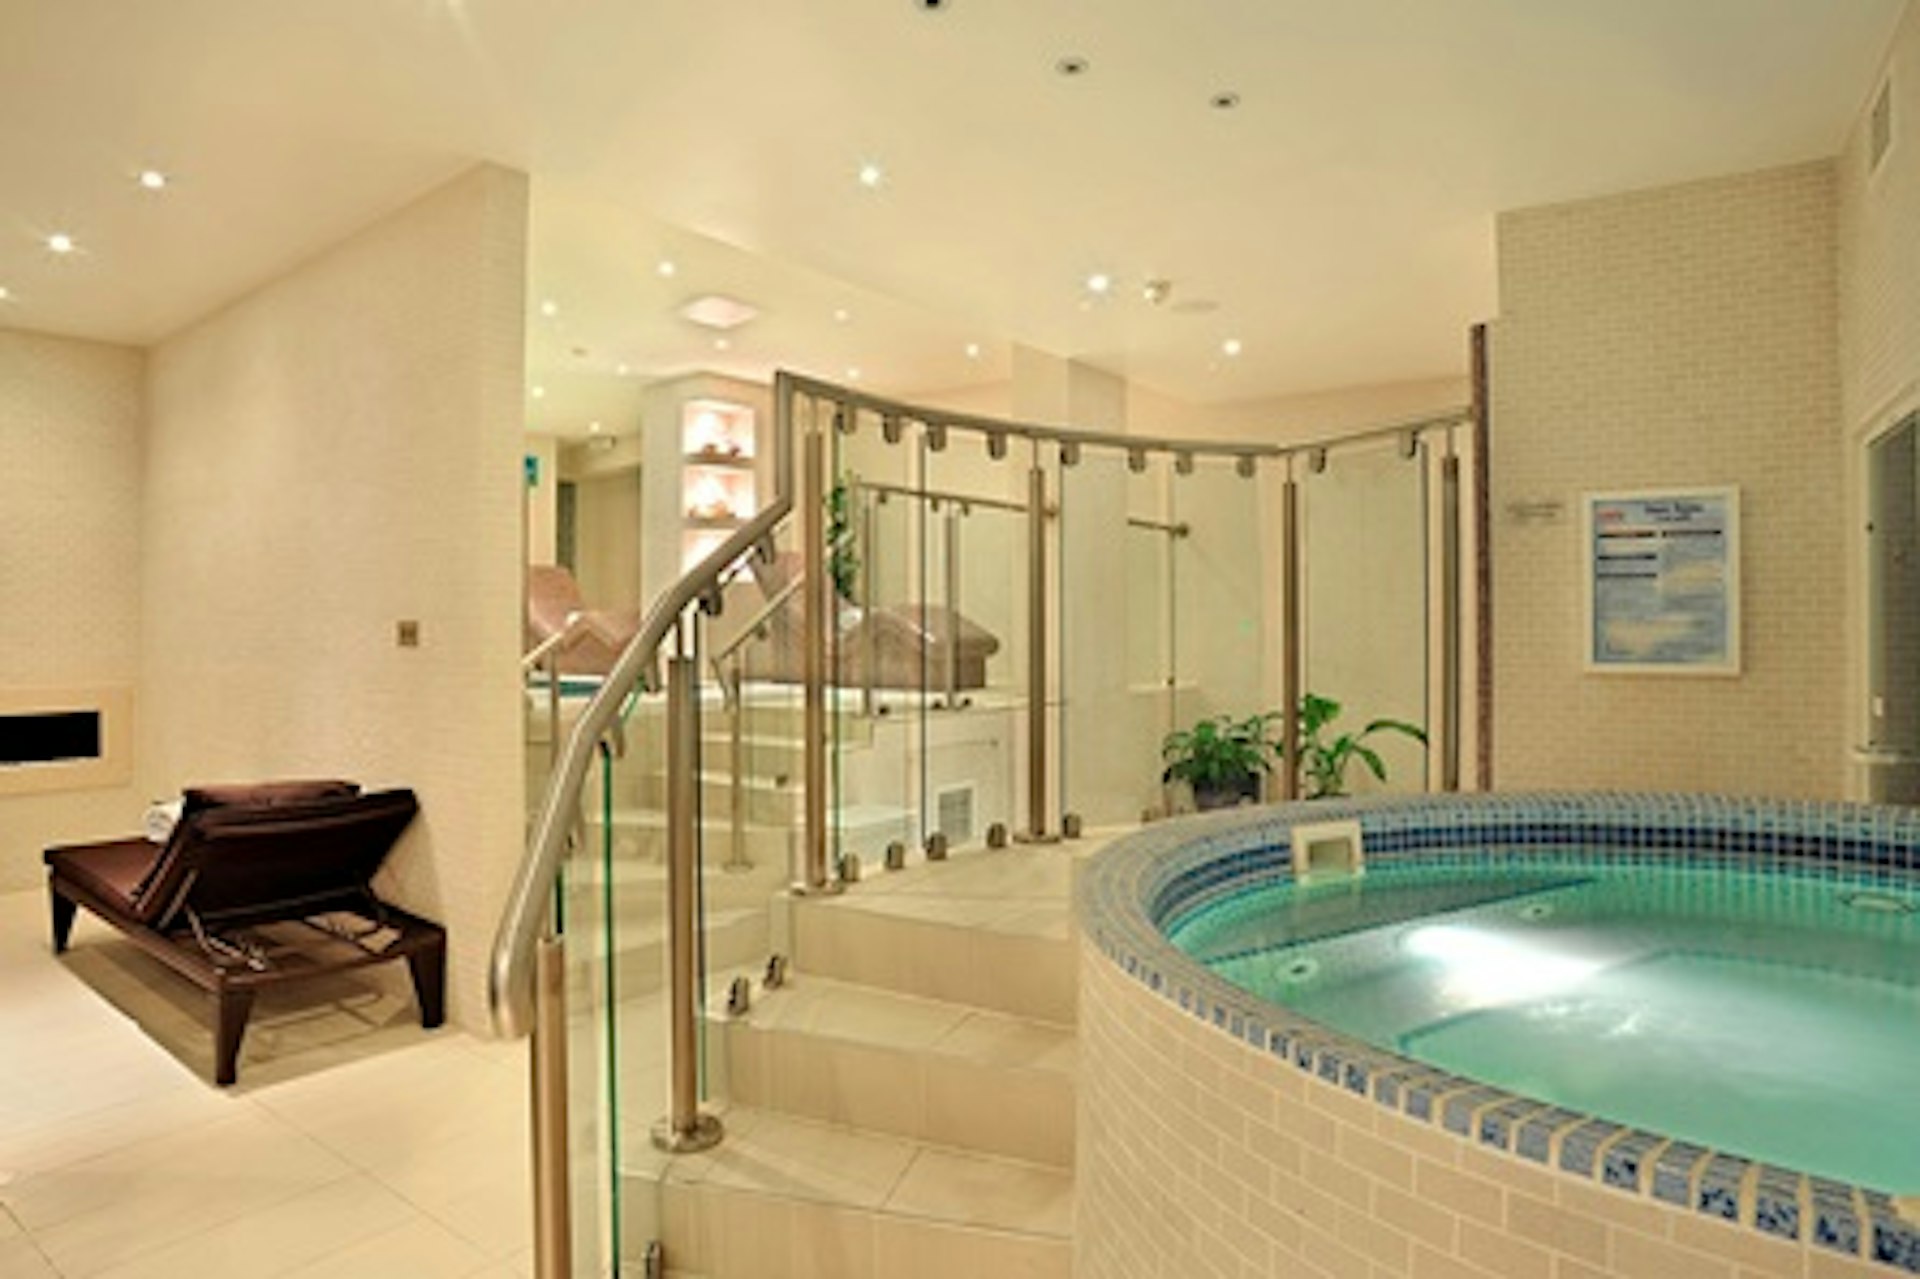 Weekend Spa Relaxation with Treatment and Prosecco at the 5* Montcalm Hotel, London Hotel, London 2